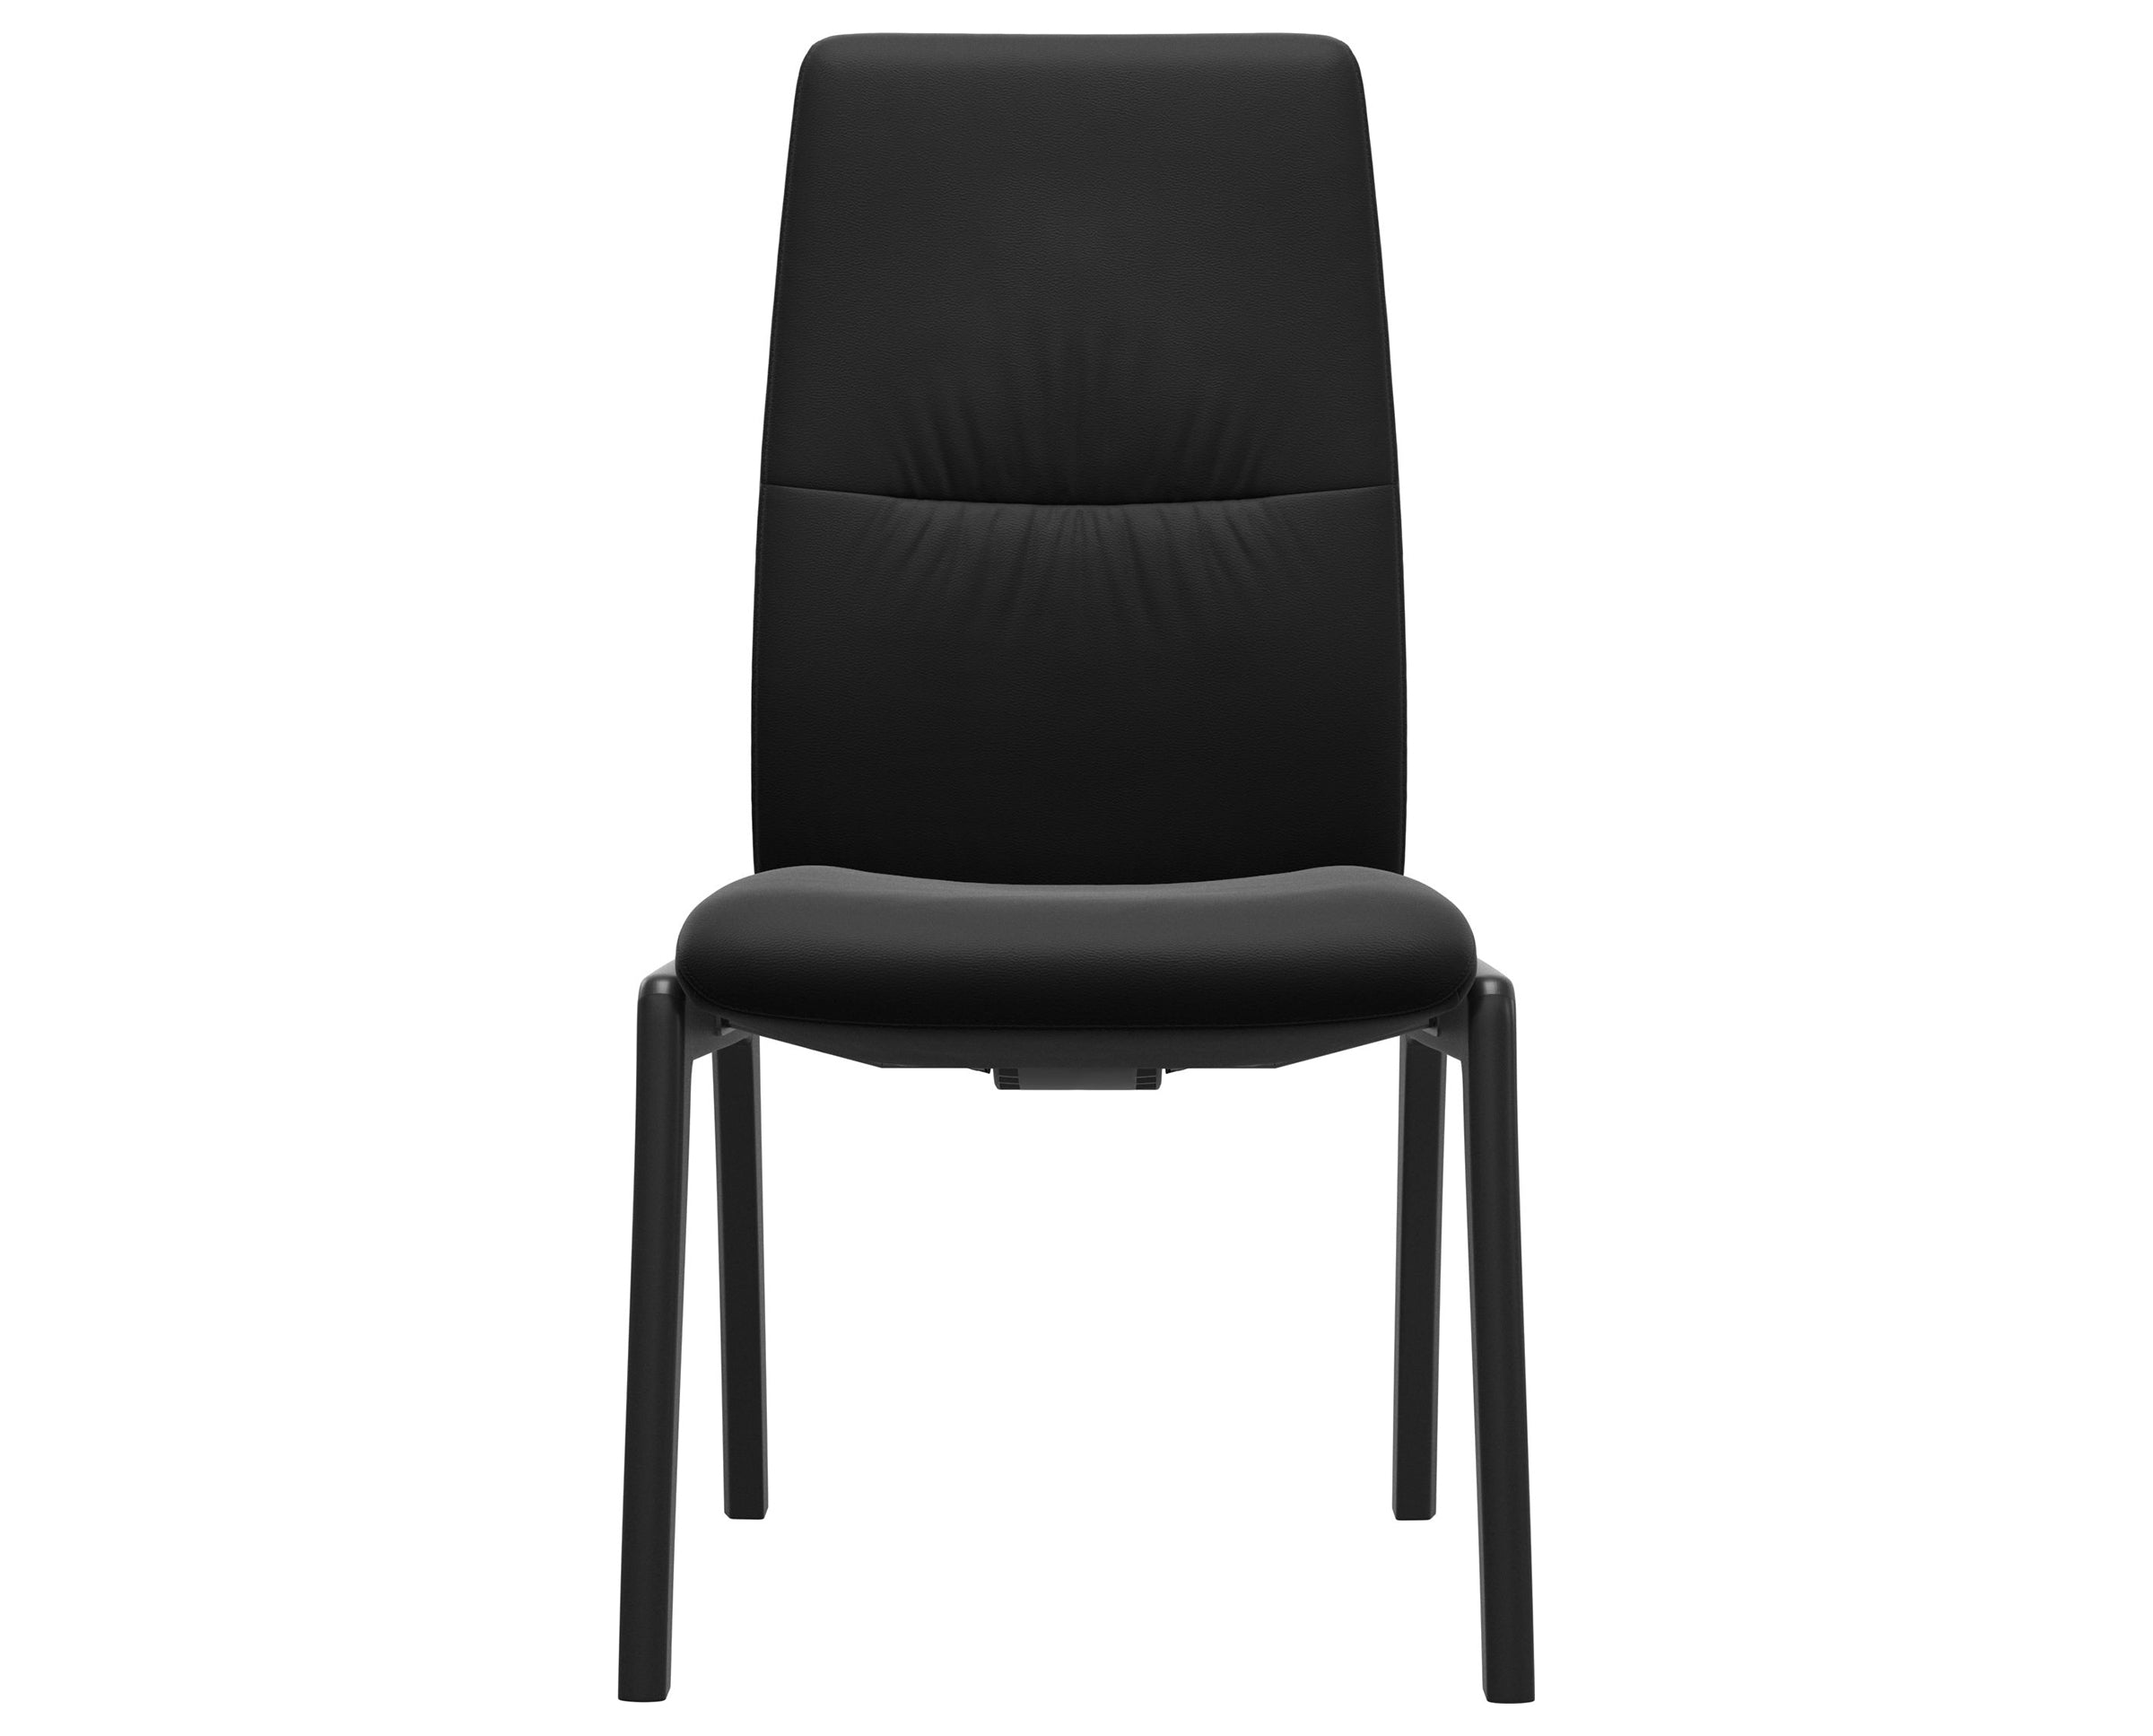 Paloma Leather Black and Black Base | Stressless Mint High Back D100 Dining Chair | Valley Ridge Furniture